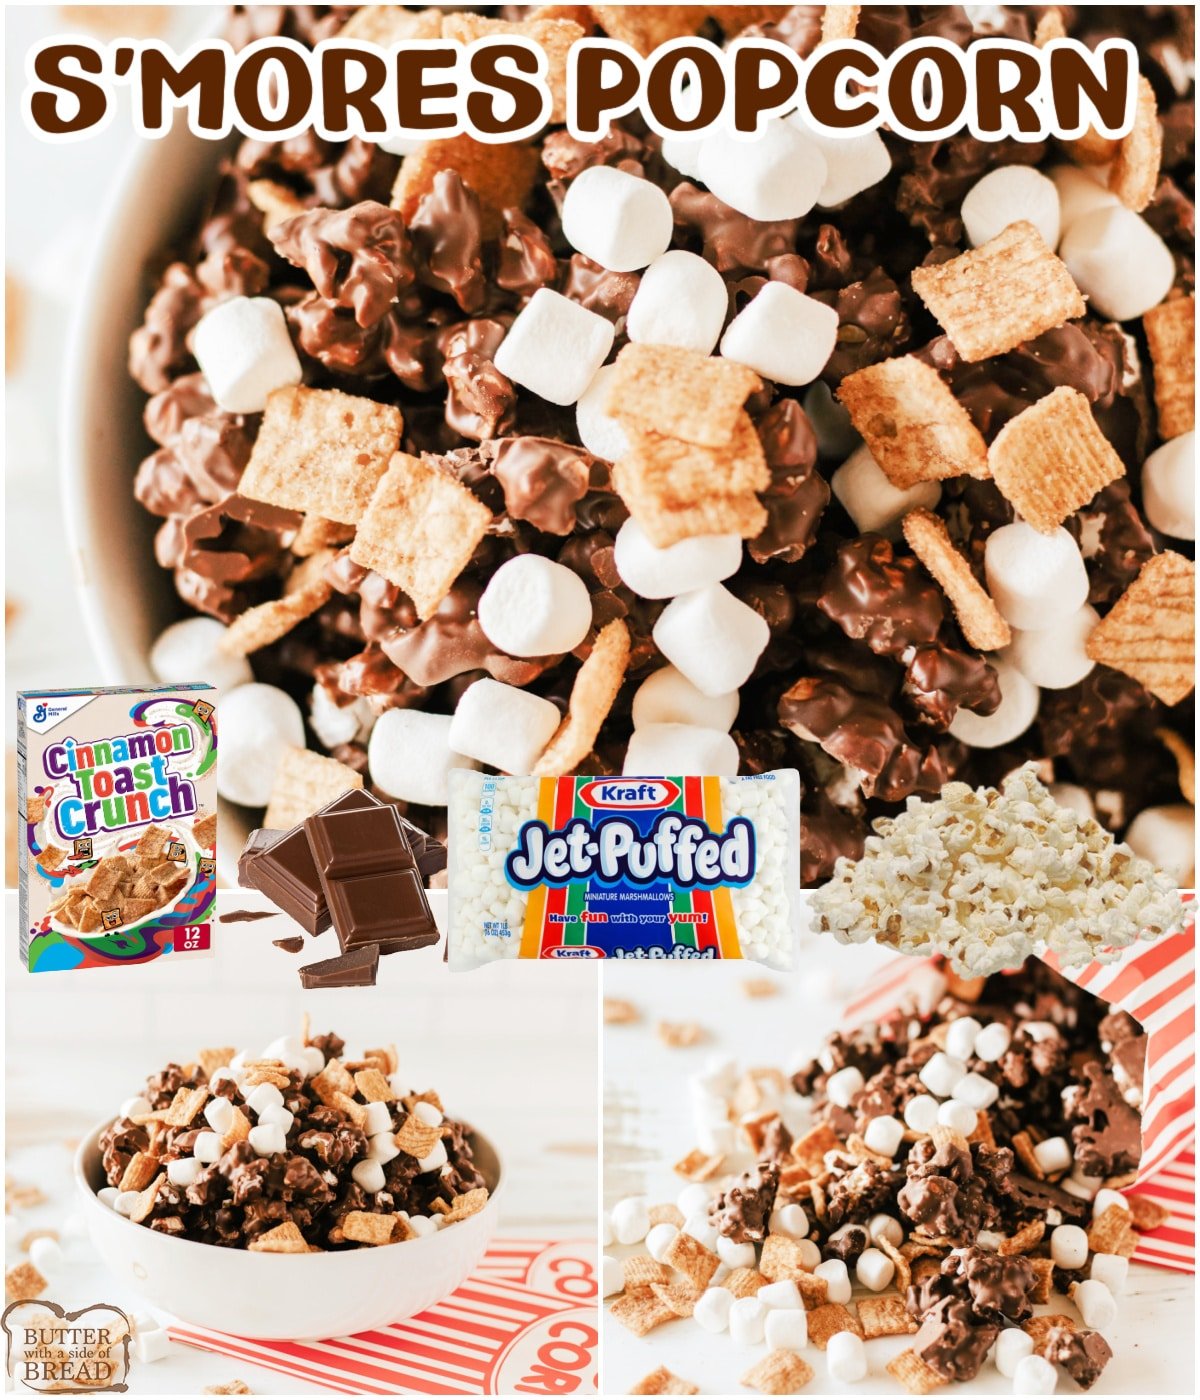 S'mores Popcorn made with chocolate, cinnamon toast crunch, and mini marshmallows in less than 10 minutes. Only 4 ingredients are needed to make this sweet popcorn recipe that tastes just like your favorite summertime treat!